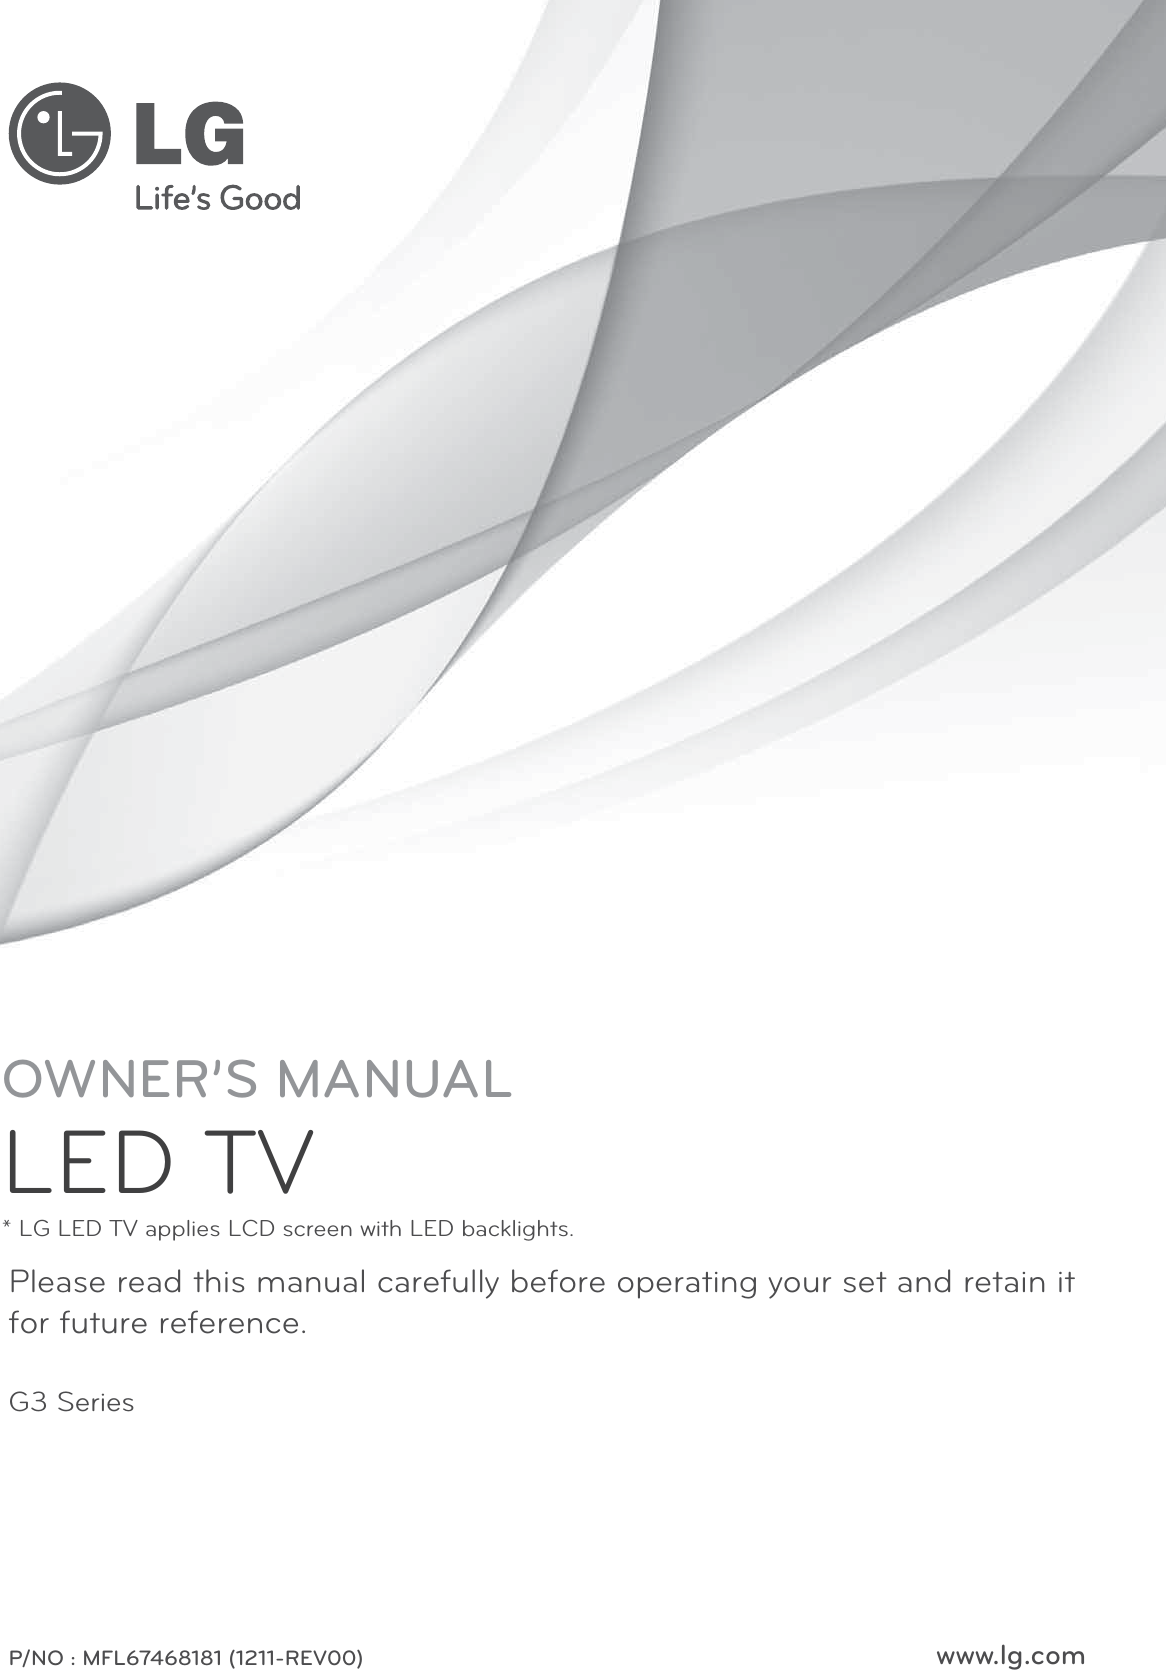 www.lg.comPlease read this manual carefully before operating your set and retain it for future reference.P/NO : MFL67468181 (1211-REV00)OWNER’S MANUALLED TV* LG LED TV applies LCD screen with LED backlights.G3 Series